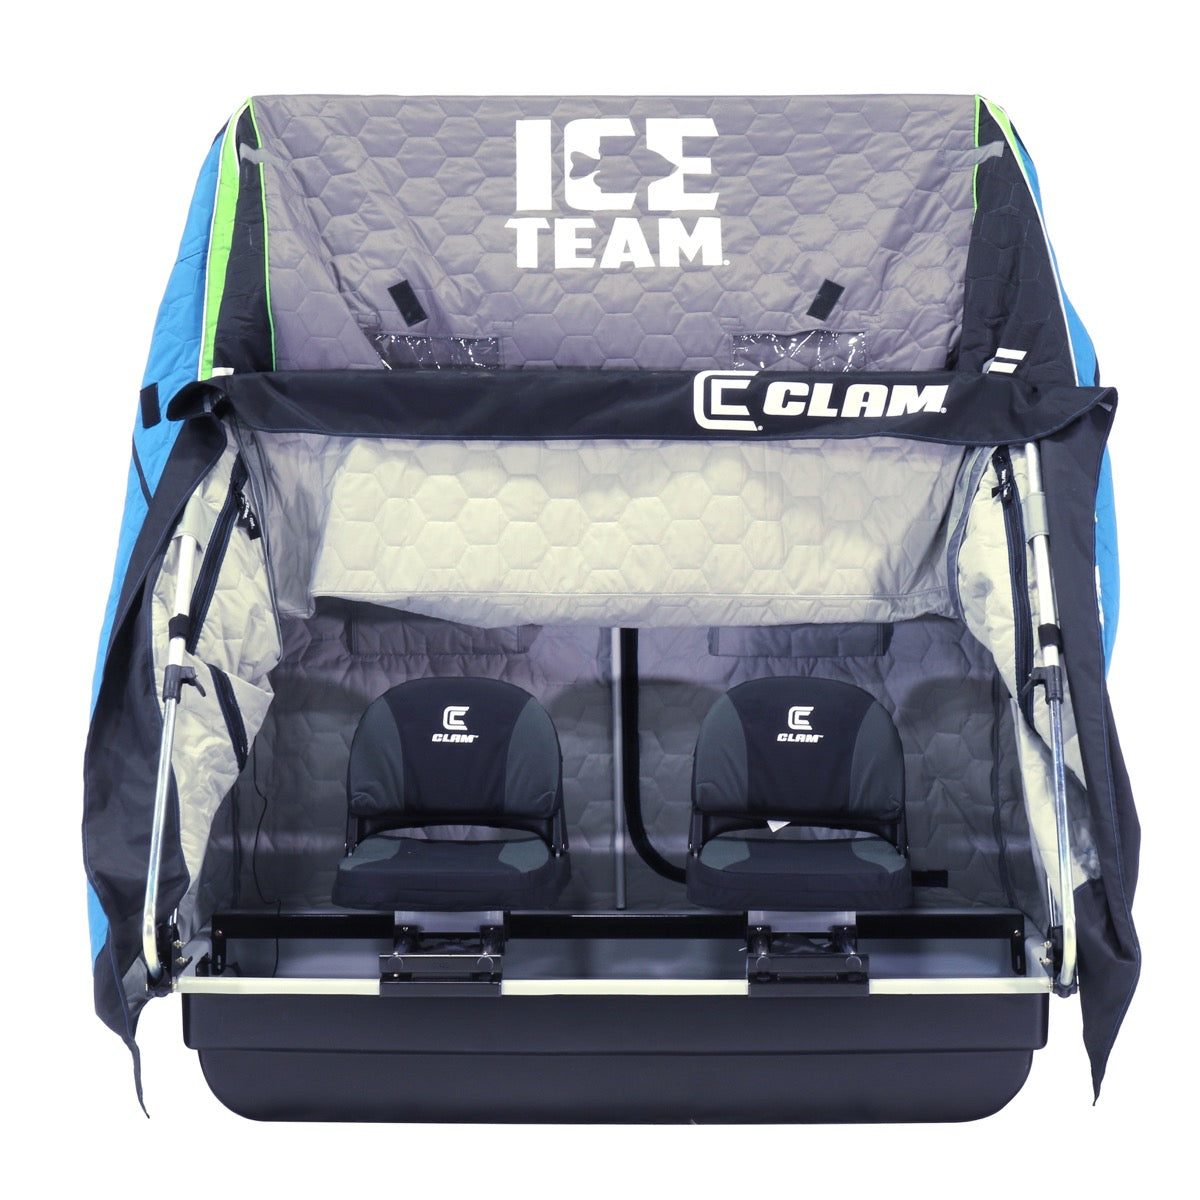 CLAM Voyager XT Thermal ICE TEAM Shelter